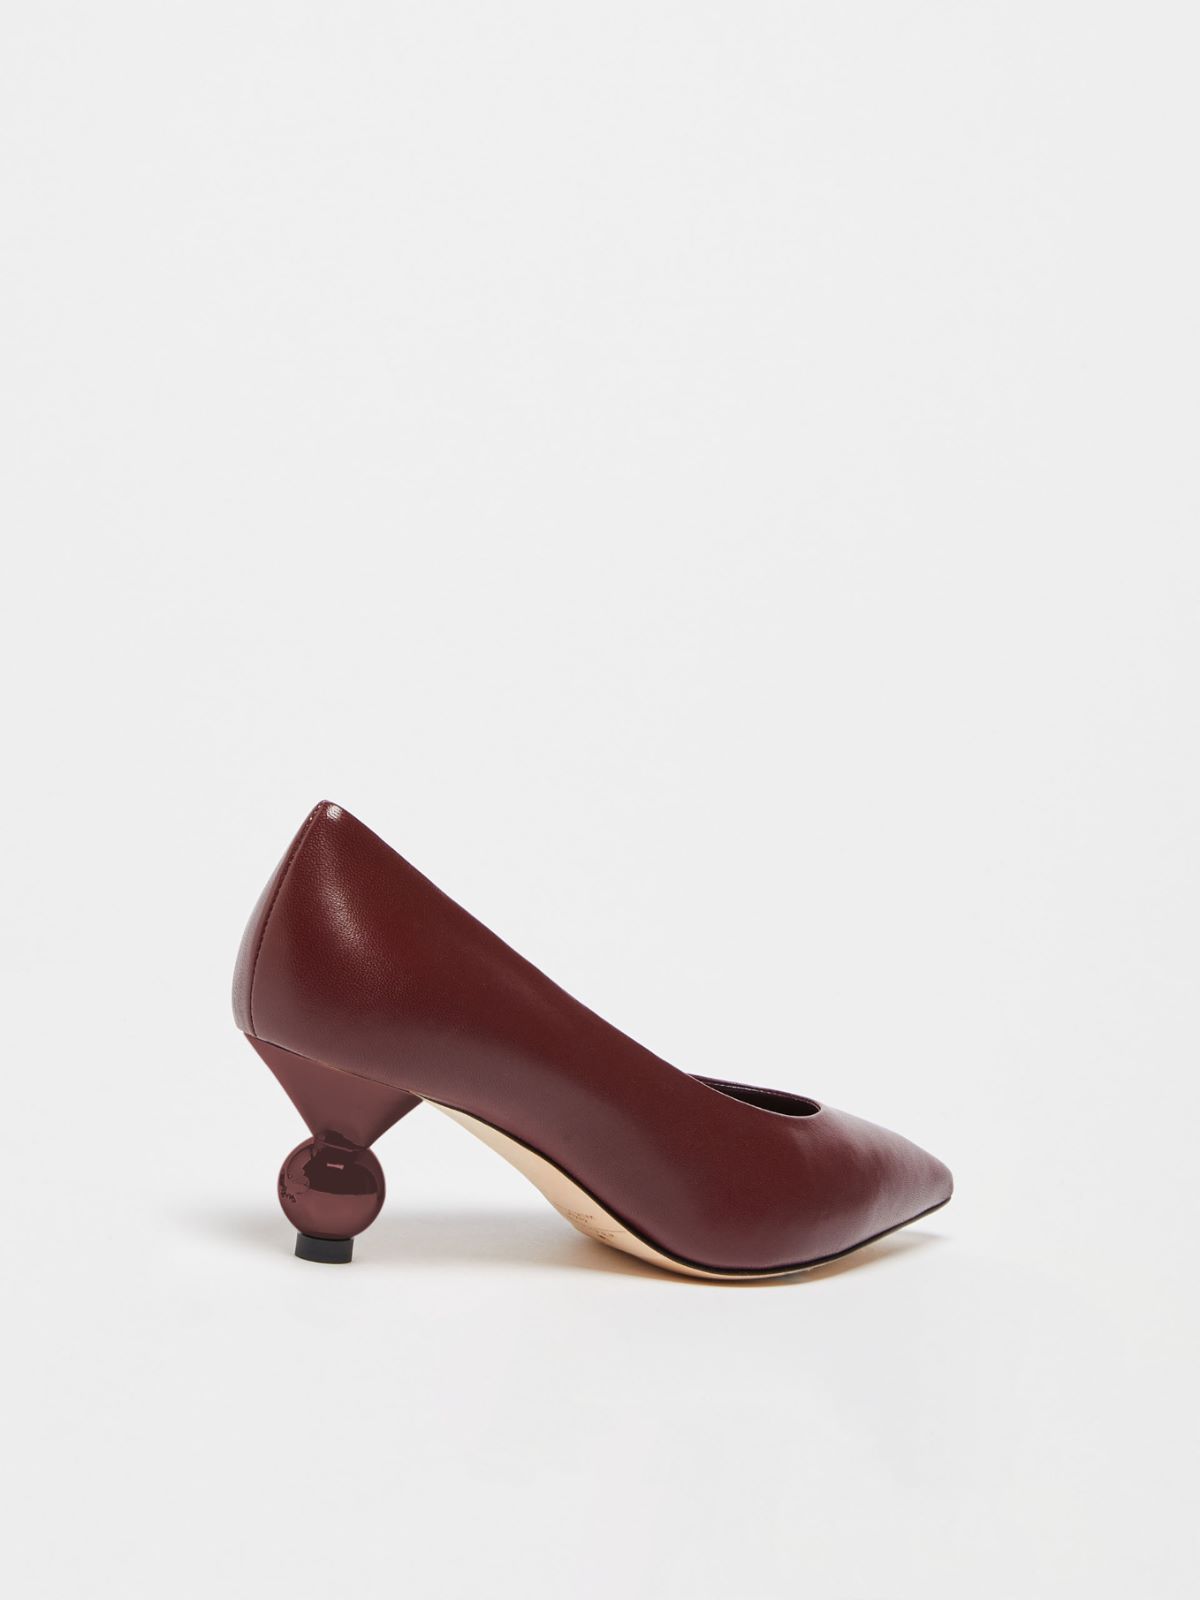 Nappa leather court shoes - BORDEAUX - Weekend Max Mara - 3